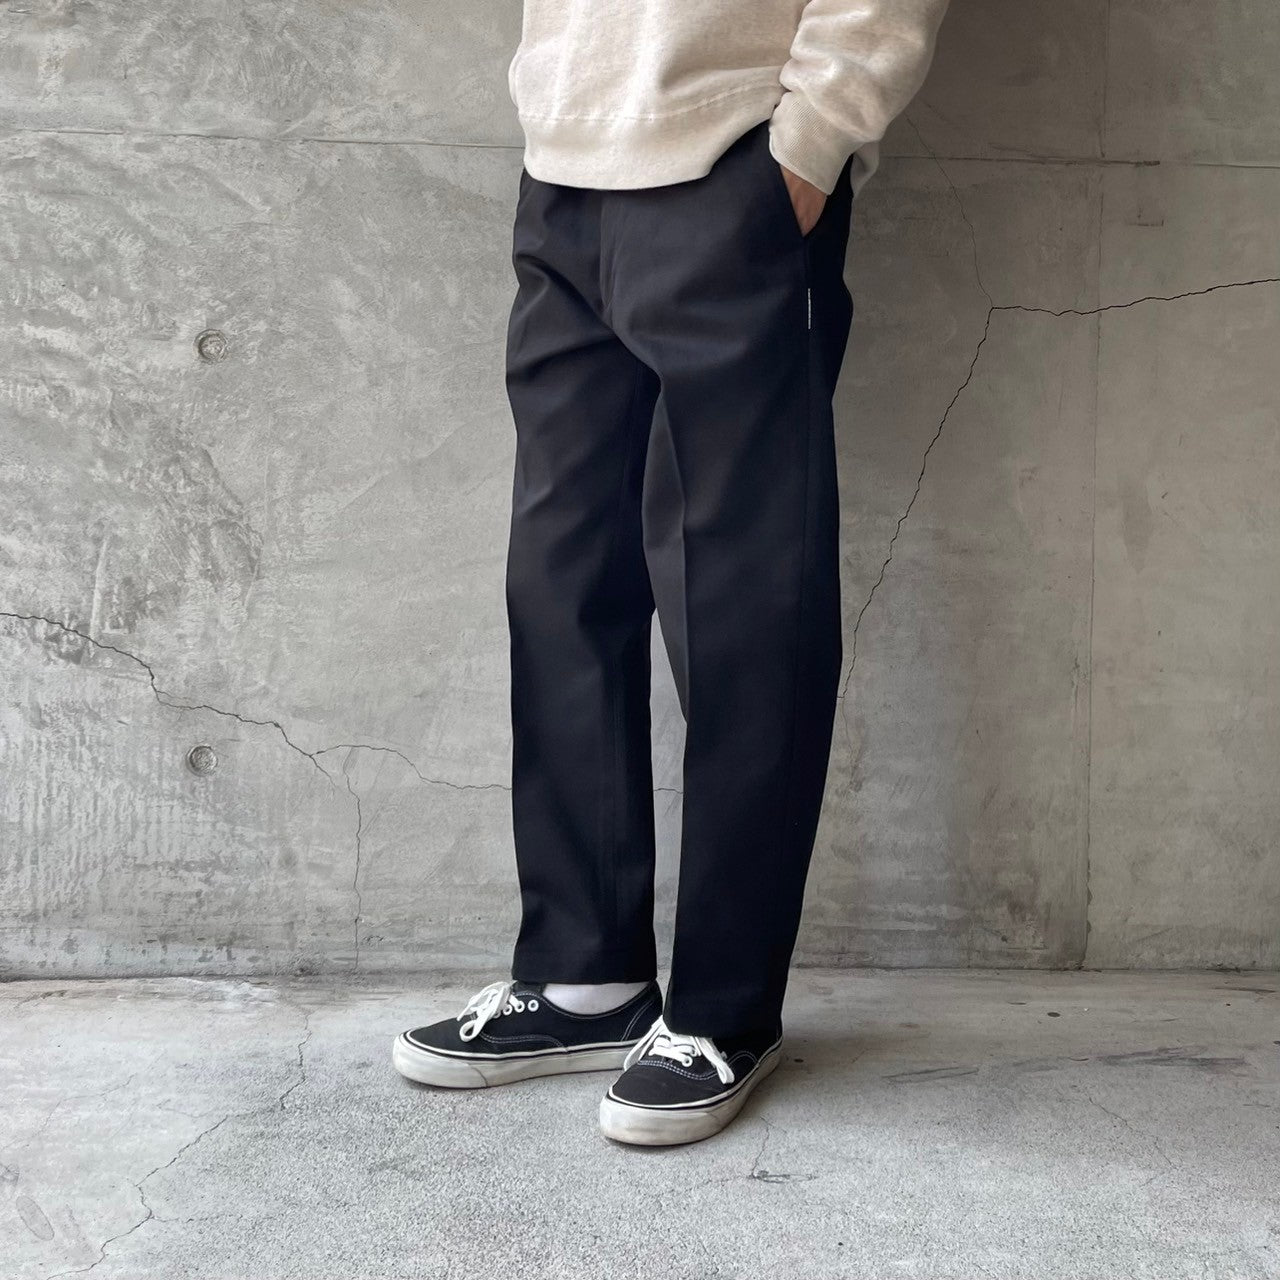 SEQUEL / CHINO PANTS TYPE-F (SQ-23AW-PT-07)